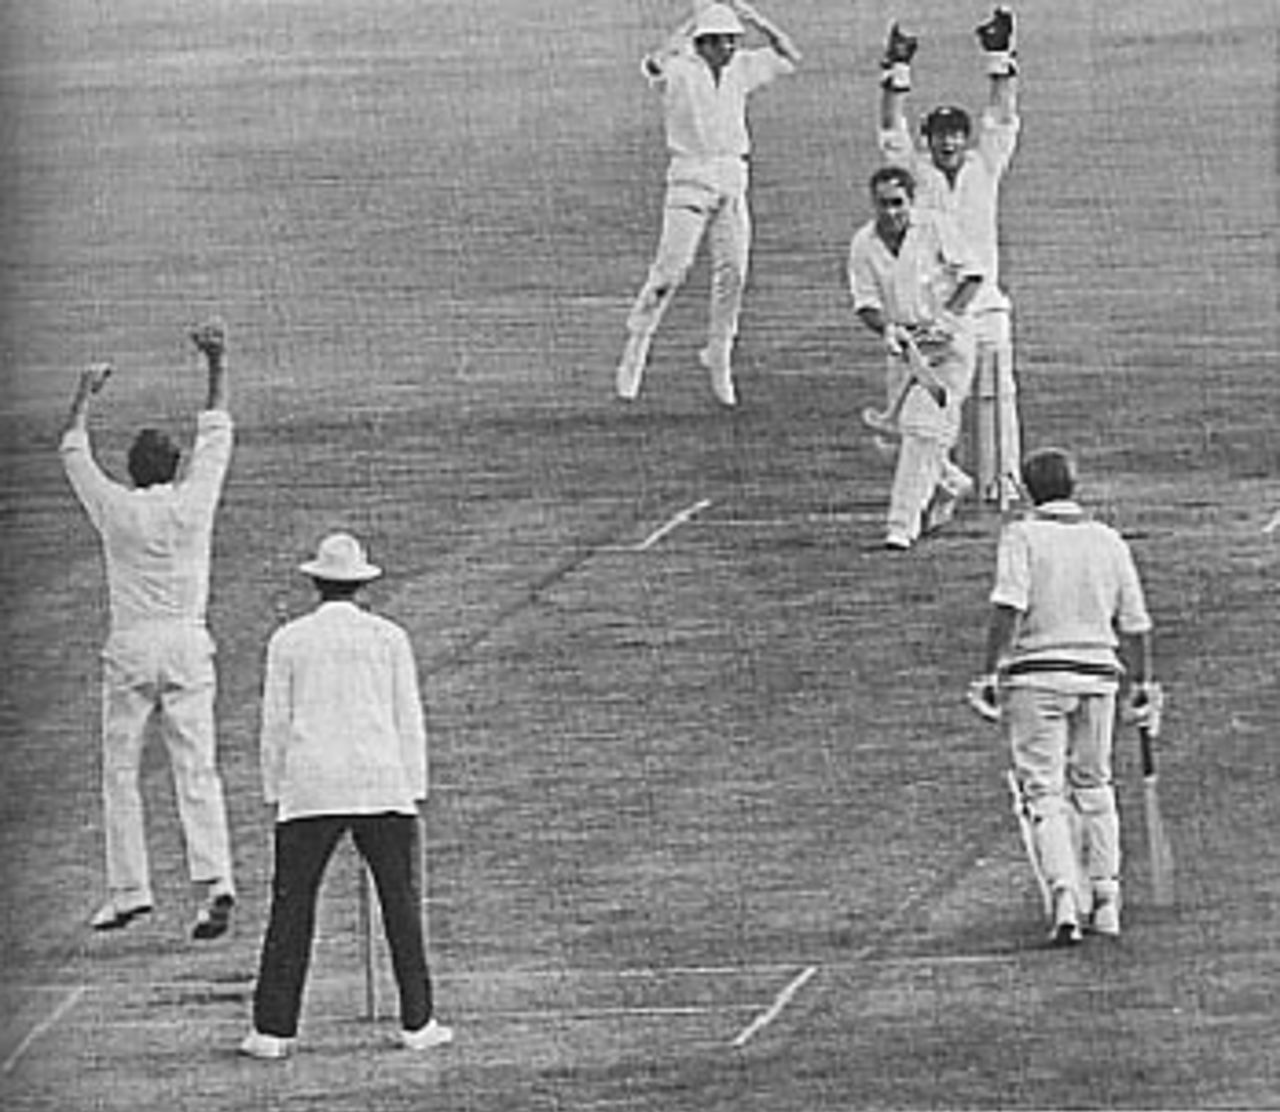 Ray Illingworth is bowled by Terry Jenner for 42, England v Australia, Sydney, 1970-71